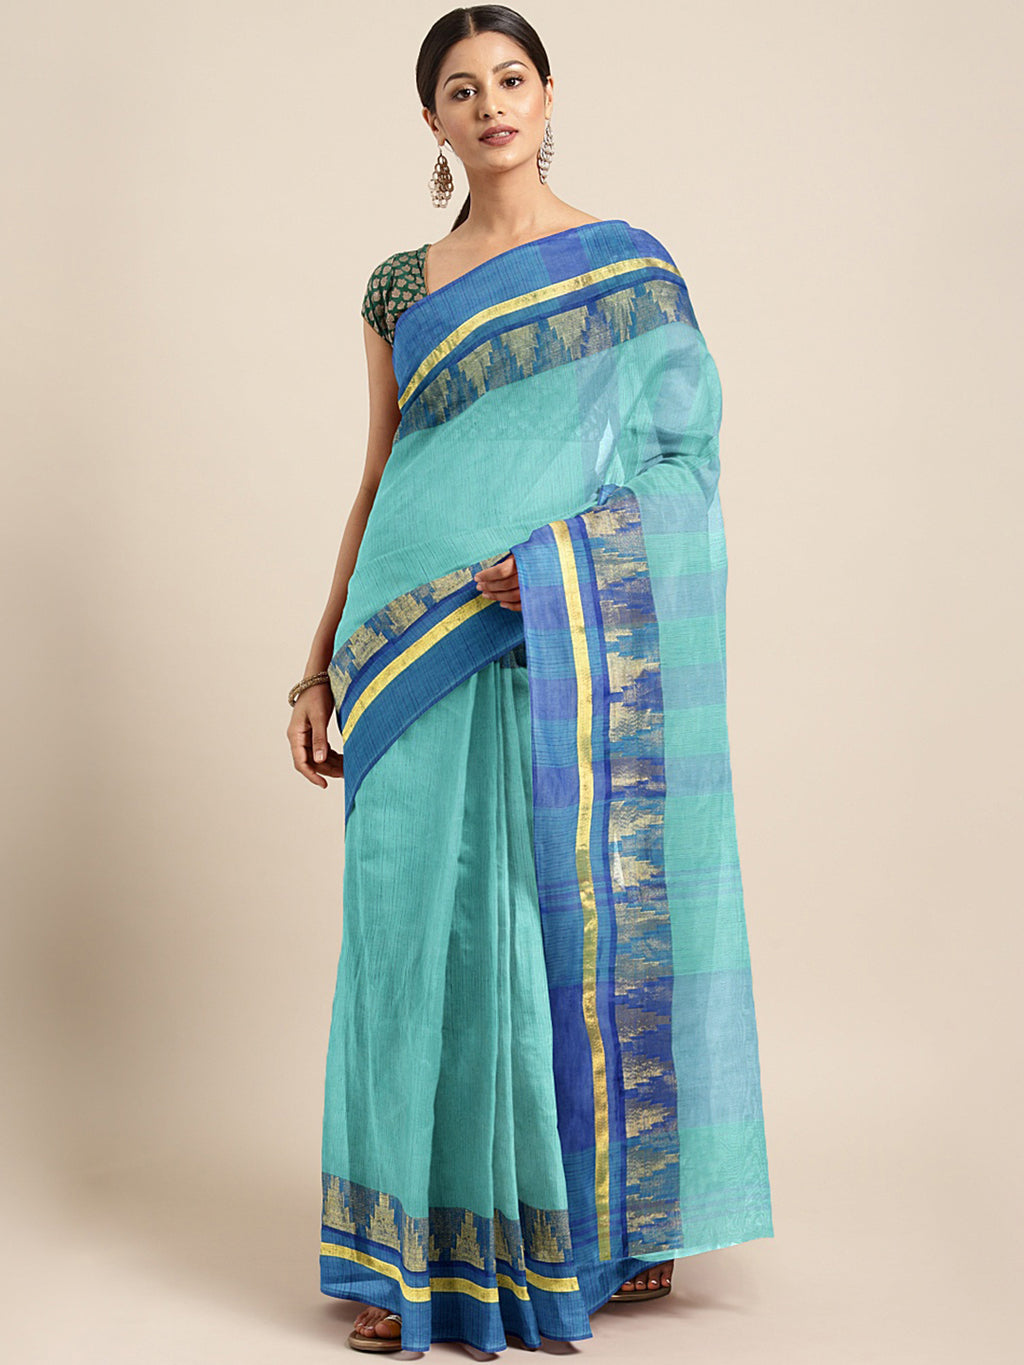 Blue Tant Woven Design Saree Without Blouse Piece DUTASA046 DUTASA046-Saree-Kalakari India-DUTASA046-Geographical Indication, Hand Crafted, Heritage Prints, Natural Dyes, Sarees, Silk Cotton, Sustainable Fabrics, Taant, Tant, West Bengal, Woven-[Linen,Ethnic,wear,Fashionista,Handloom,Handicraft,Indigo,blockprint,block,print,Cotton,Chanderi,Blue, latest,classy,party,bollywood,trendy,summer,style,traditional,formal,elegant,unique,style,hand,block,print, dabu,booti,gift,present,glamorous,affordable